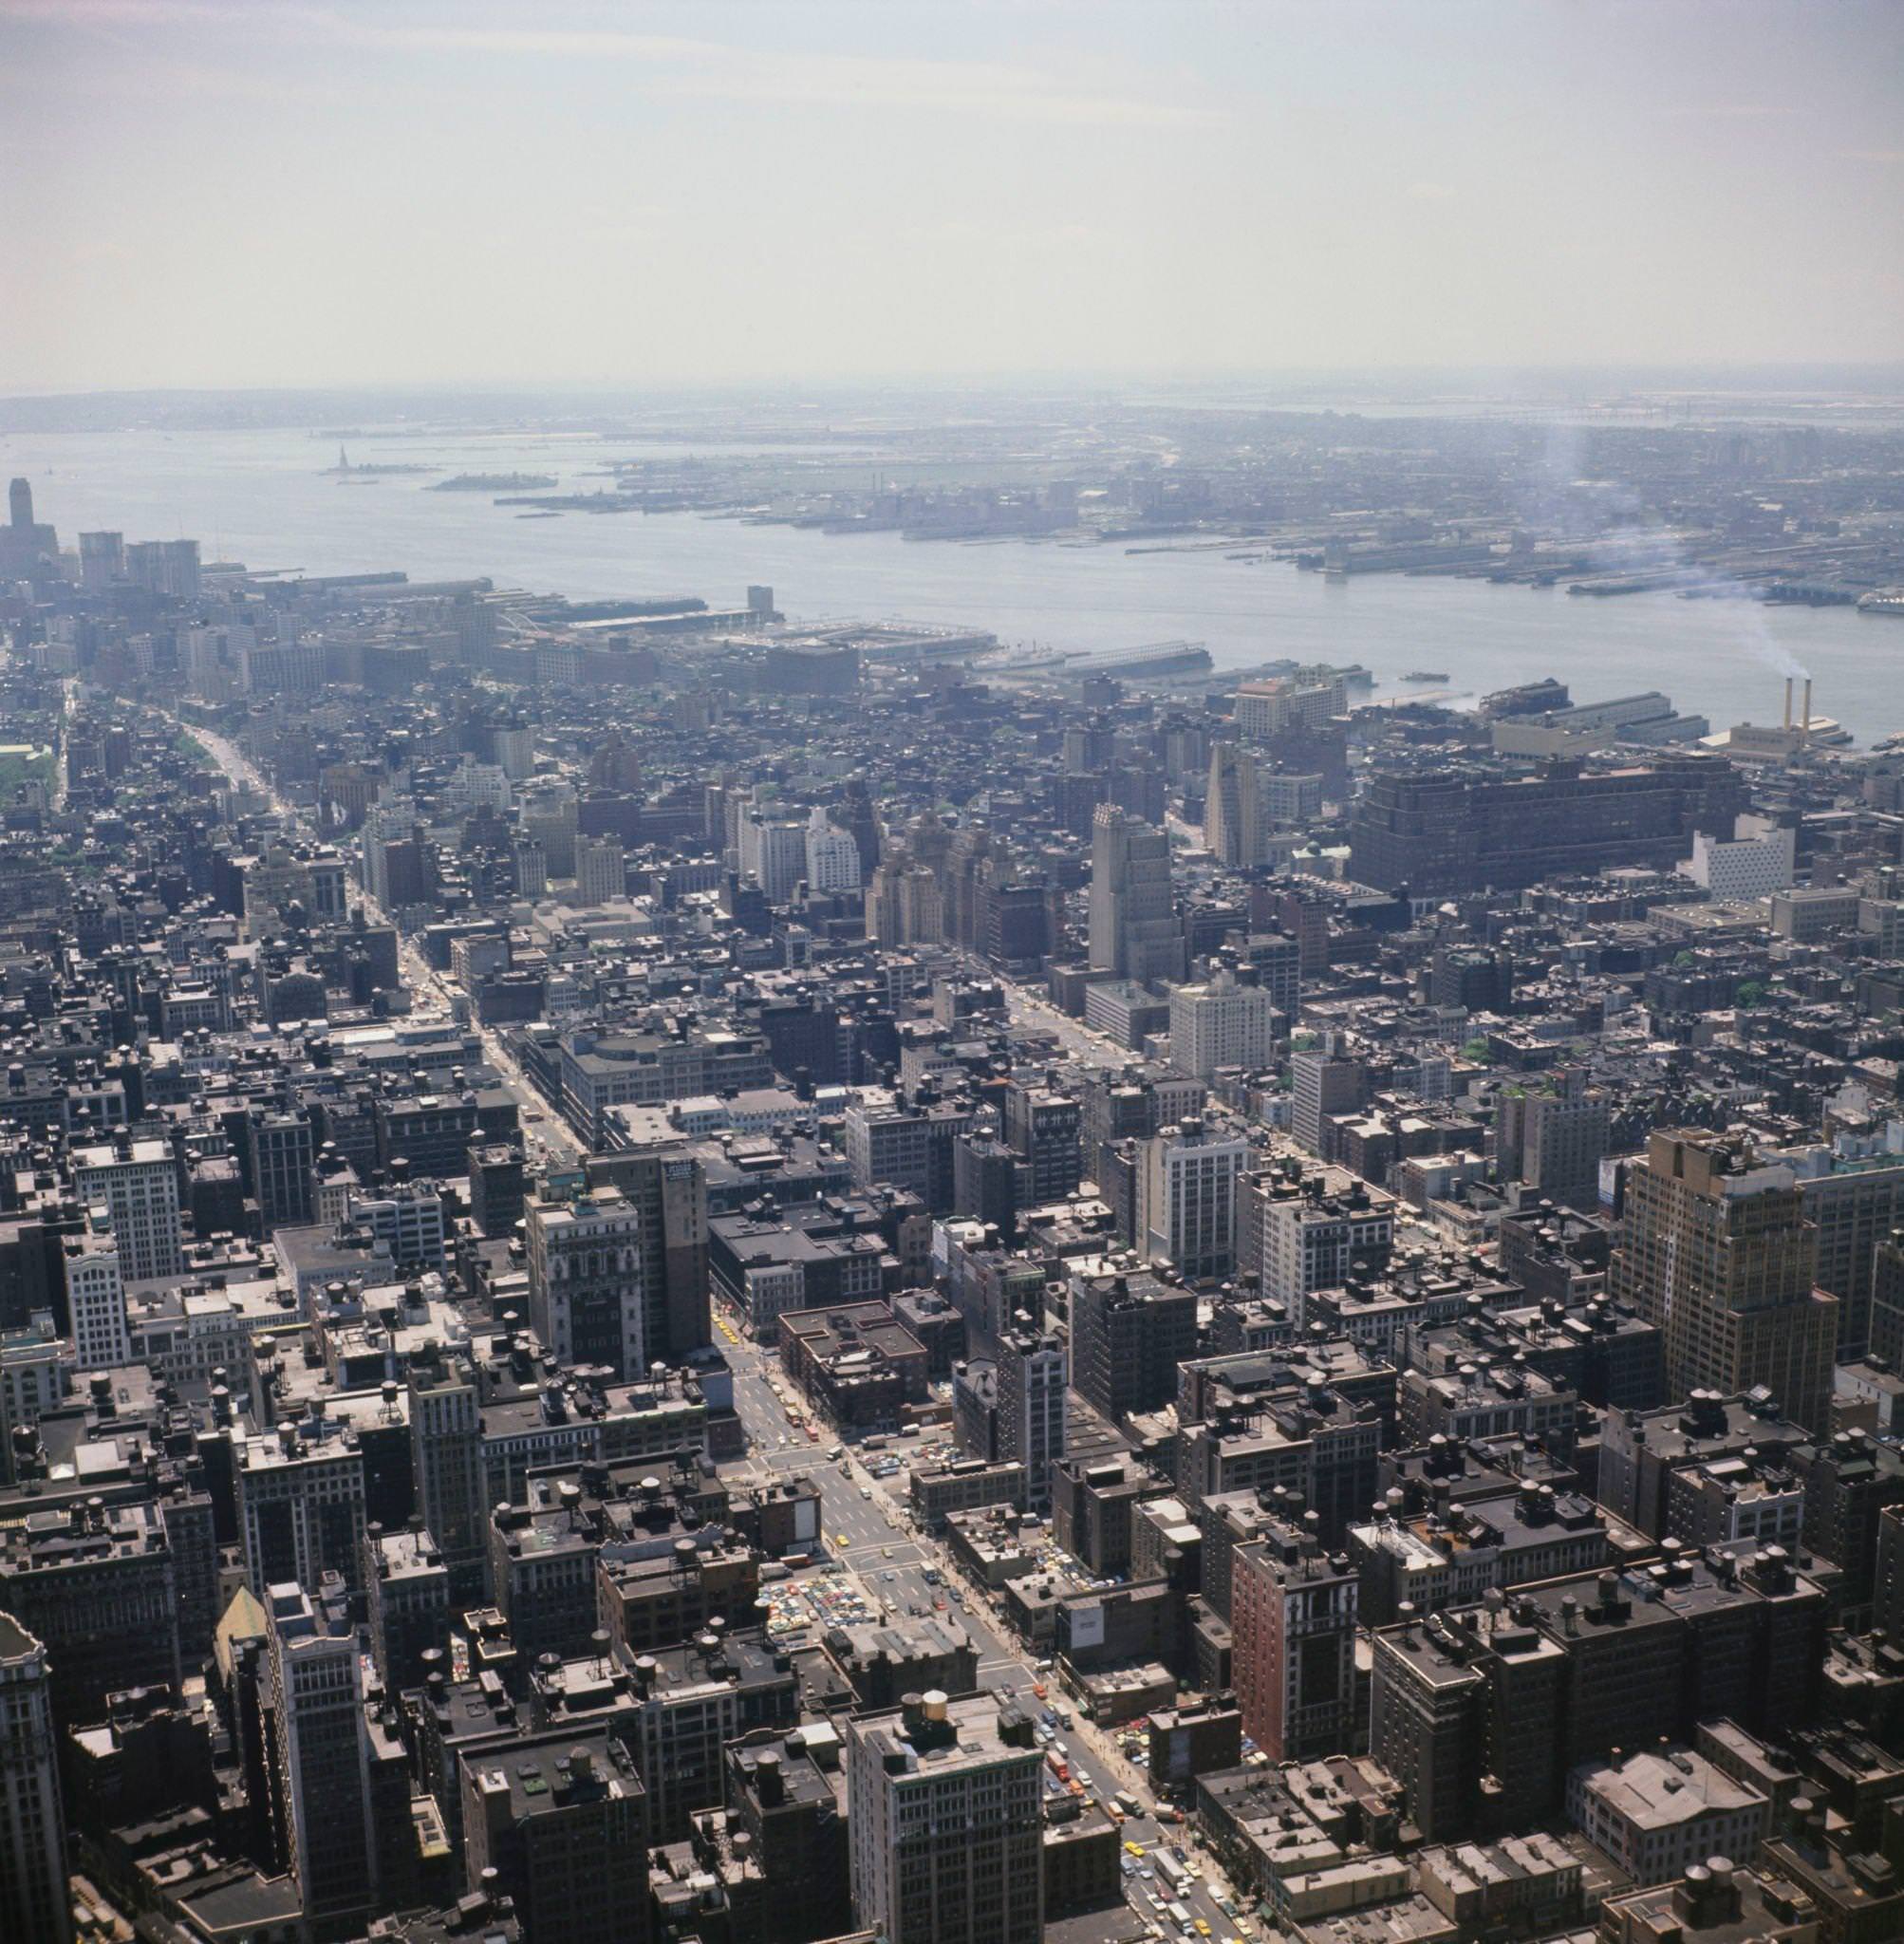 Aerial view from the top of the Empire State Building looking south-west over 7th and 8th Avenues in Manhattan to the Hudson River and Jersey City in New Jersey beyond, 1970